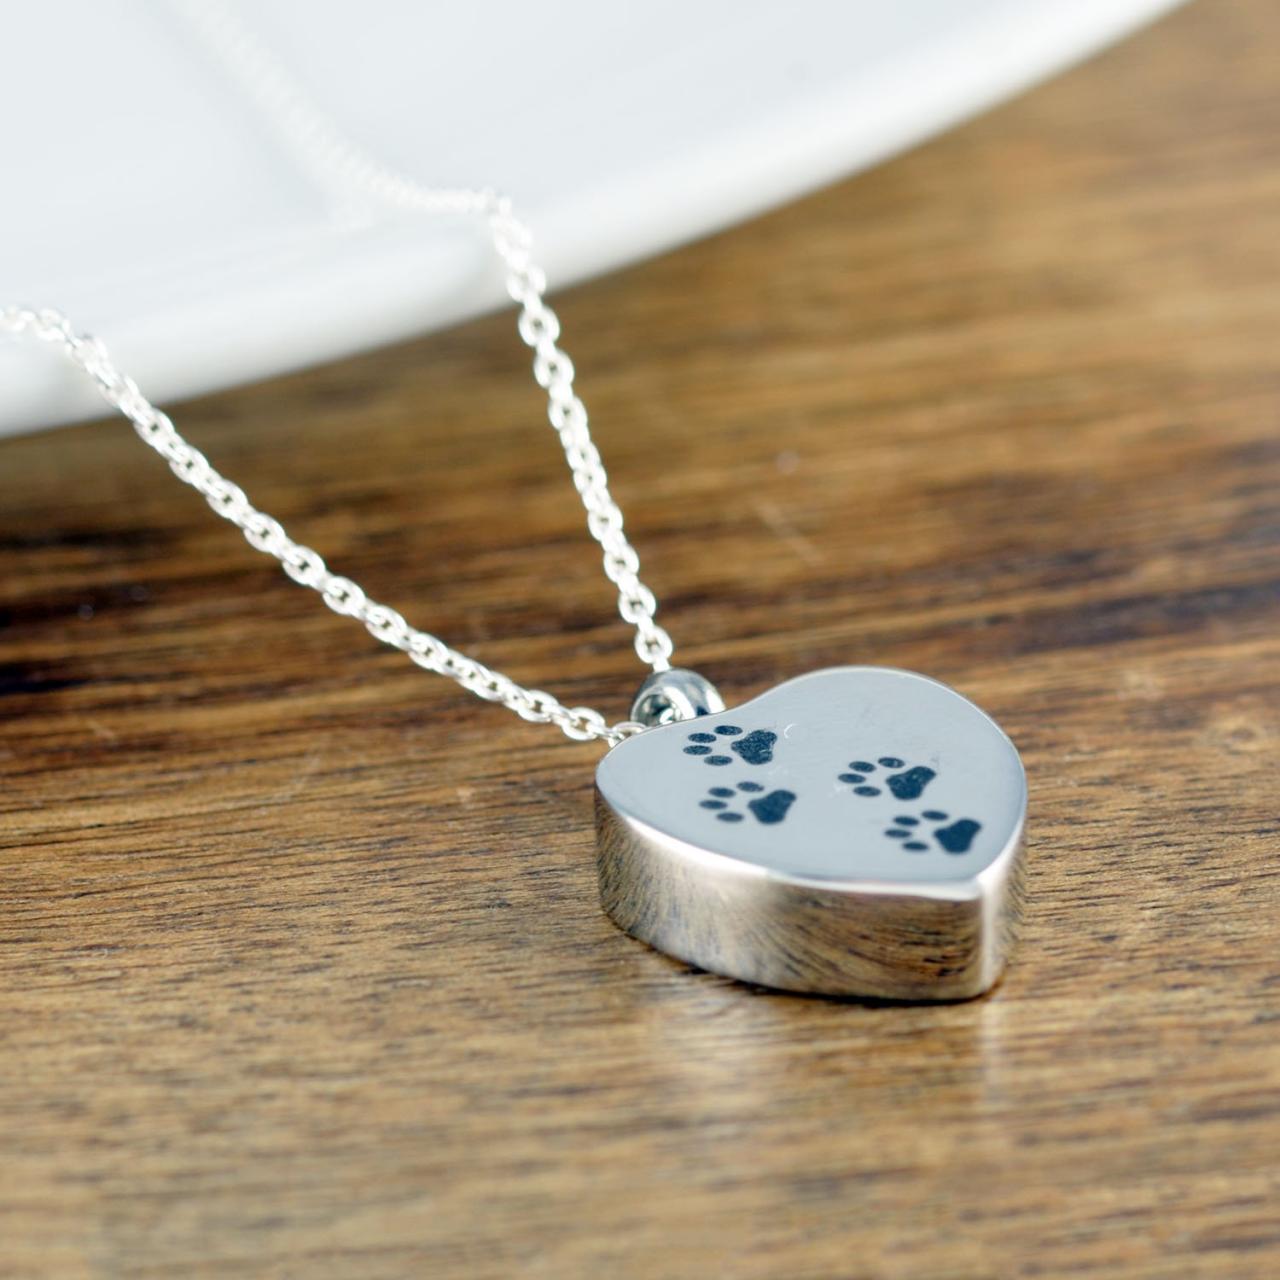 Dog Memorial Gift, Pet Jewelry, Gift for Her, Cremation Urn, Silver Necklace, Cremation Jewelry, Loss of Pet, Ash Jewelry,Cremation Necklace